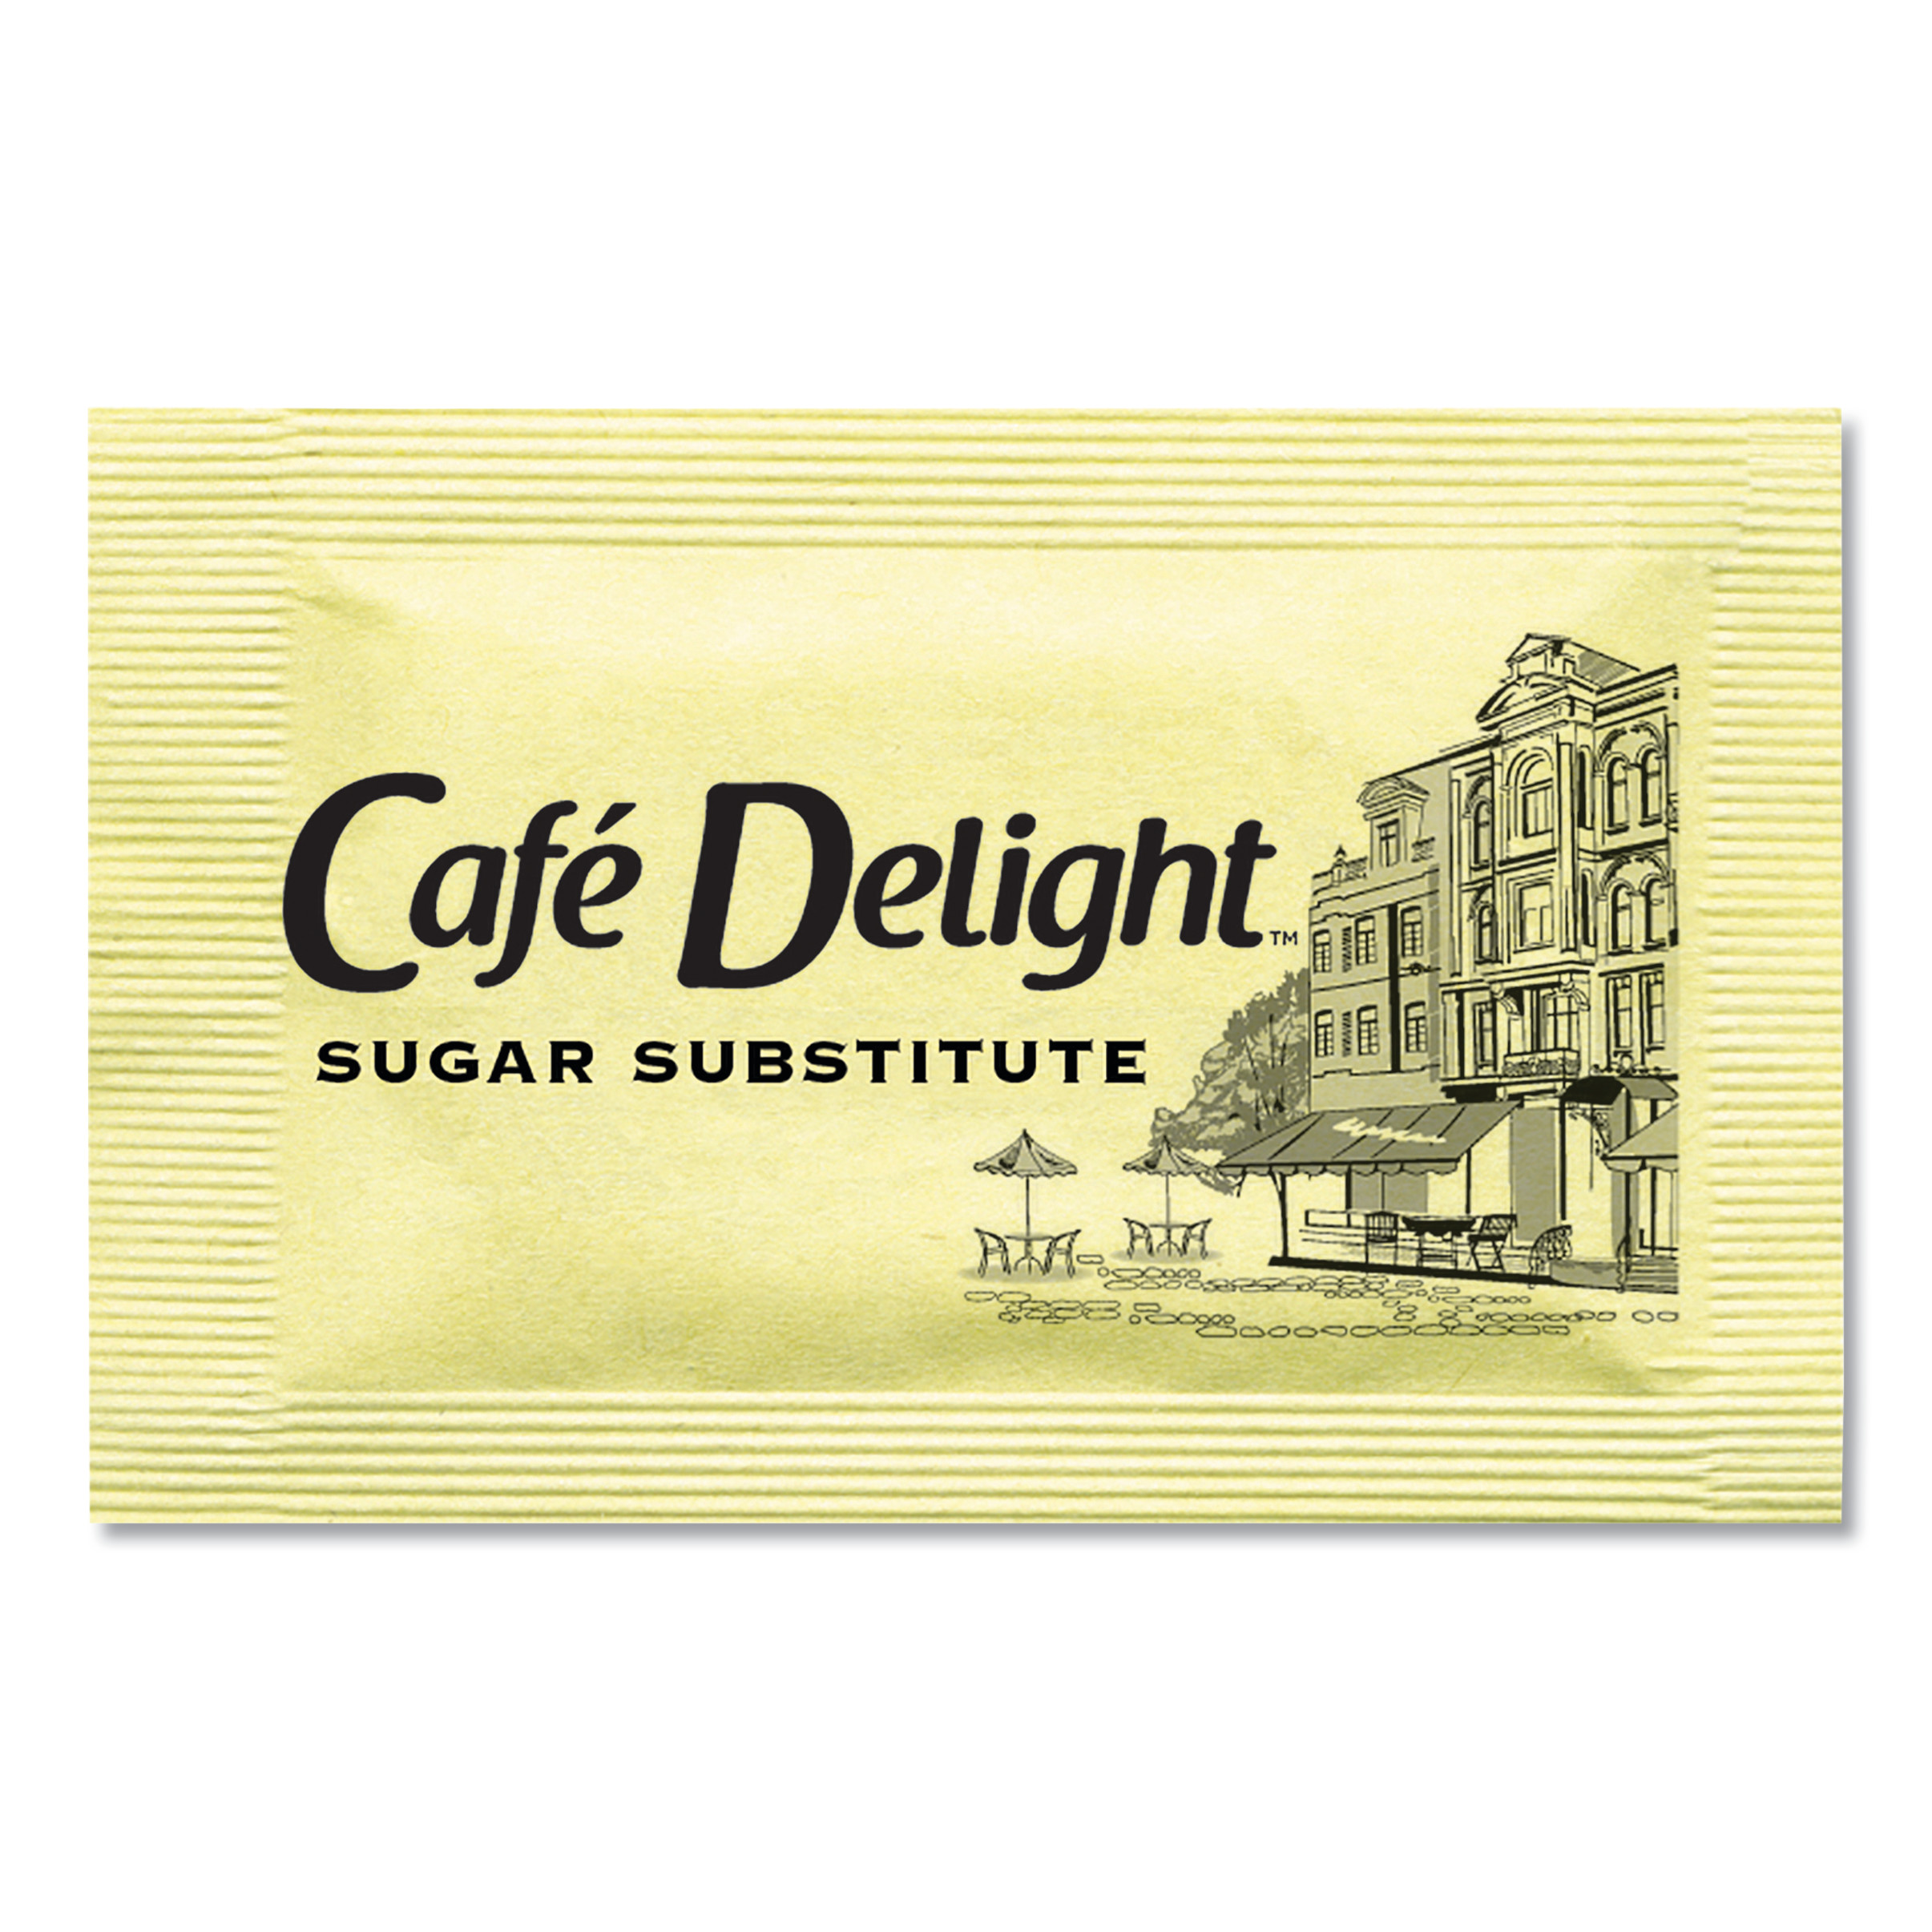  Café Delight OFX11101 Yellow Sweetener Packets, 0.08 g Packet, 2000 Packets/Box (OFX11101) 